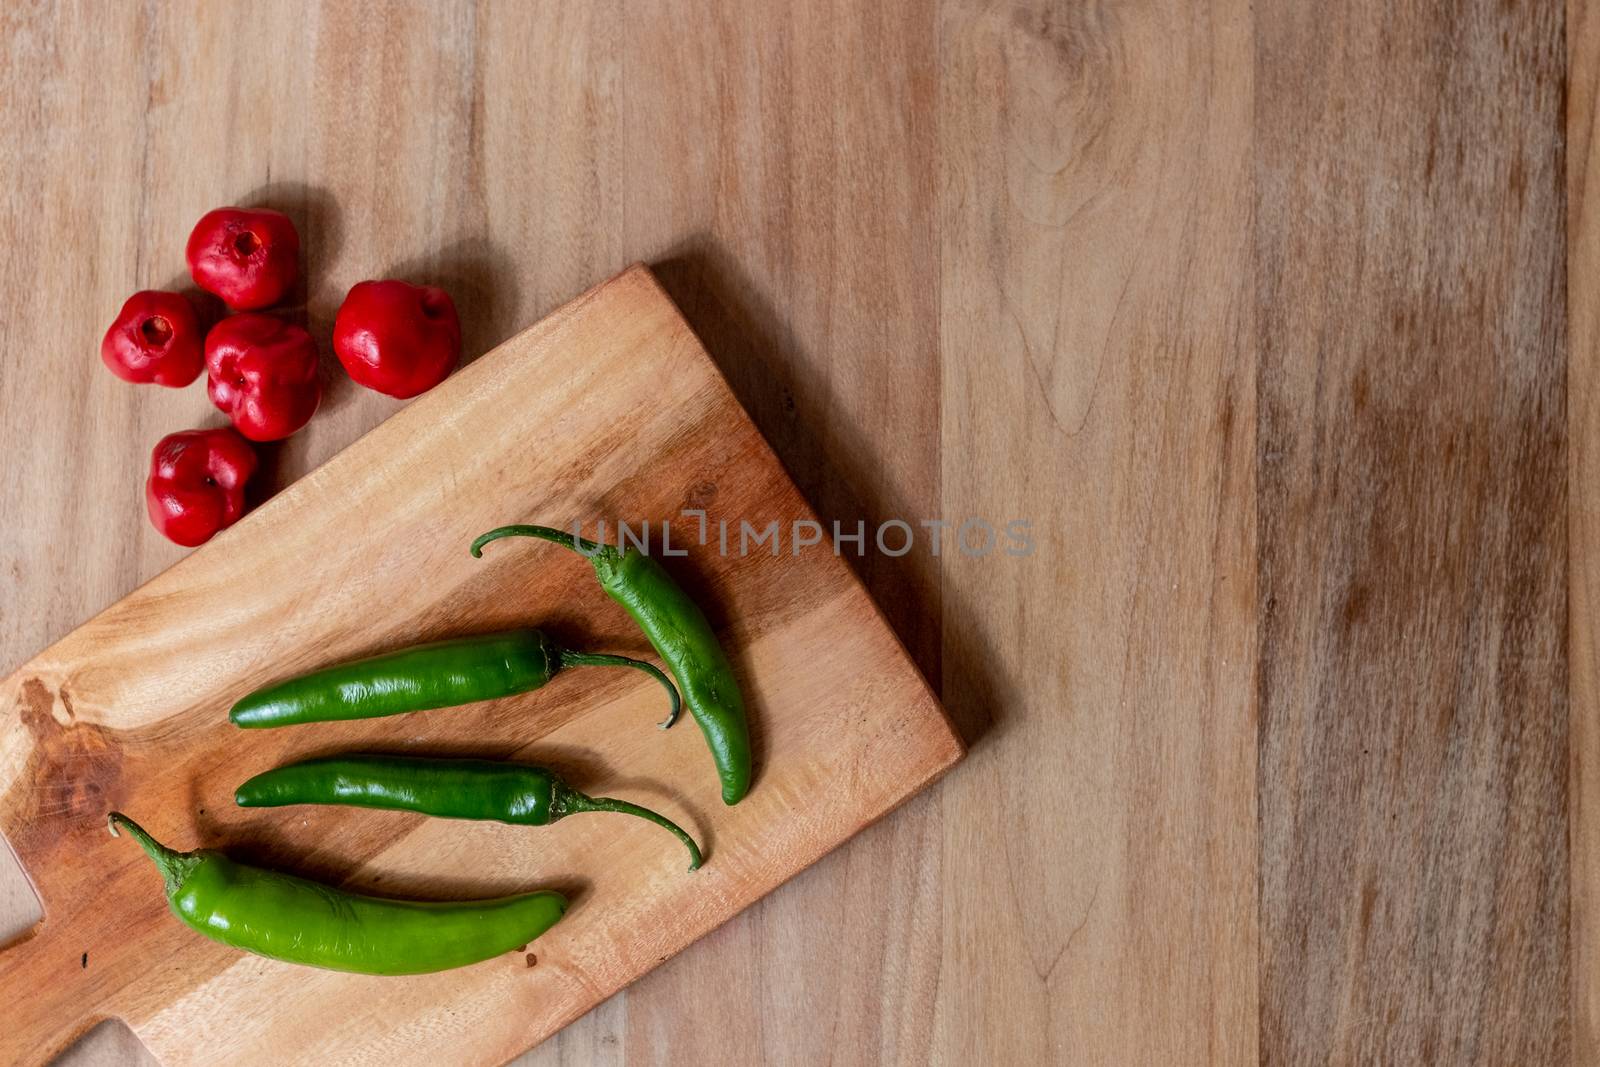 Apple and serrano peppers on chopping board on wooden surface. by leo_de_la_garza